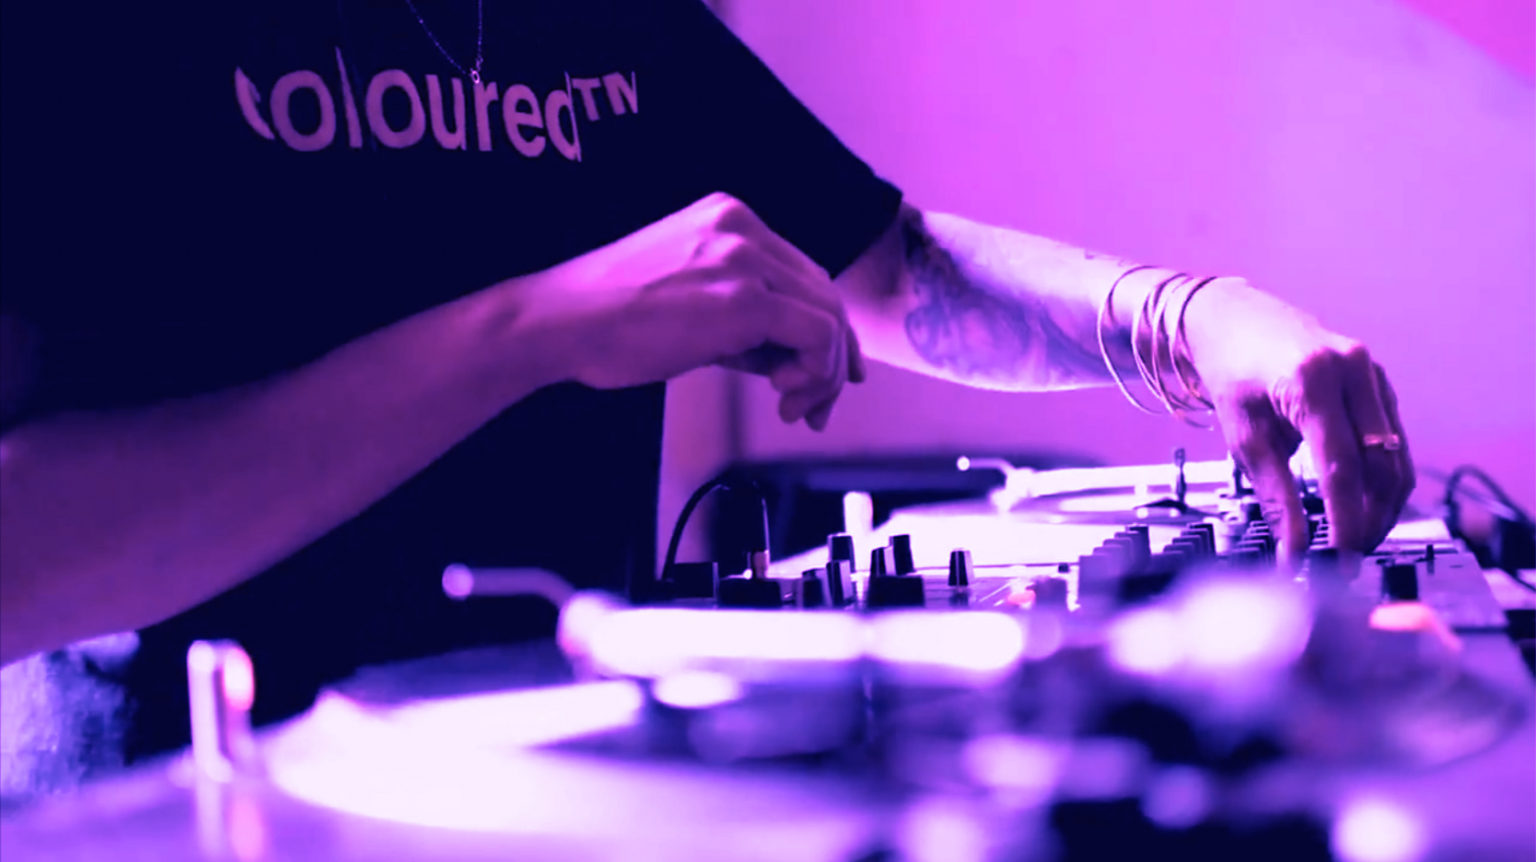 An image of a DJ turning knobs on a mixer, wearing multiple bangles and Roberta Joy Rich’s Coloured™ T-Shirt.